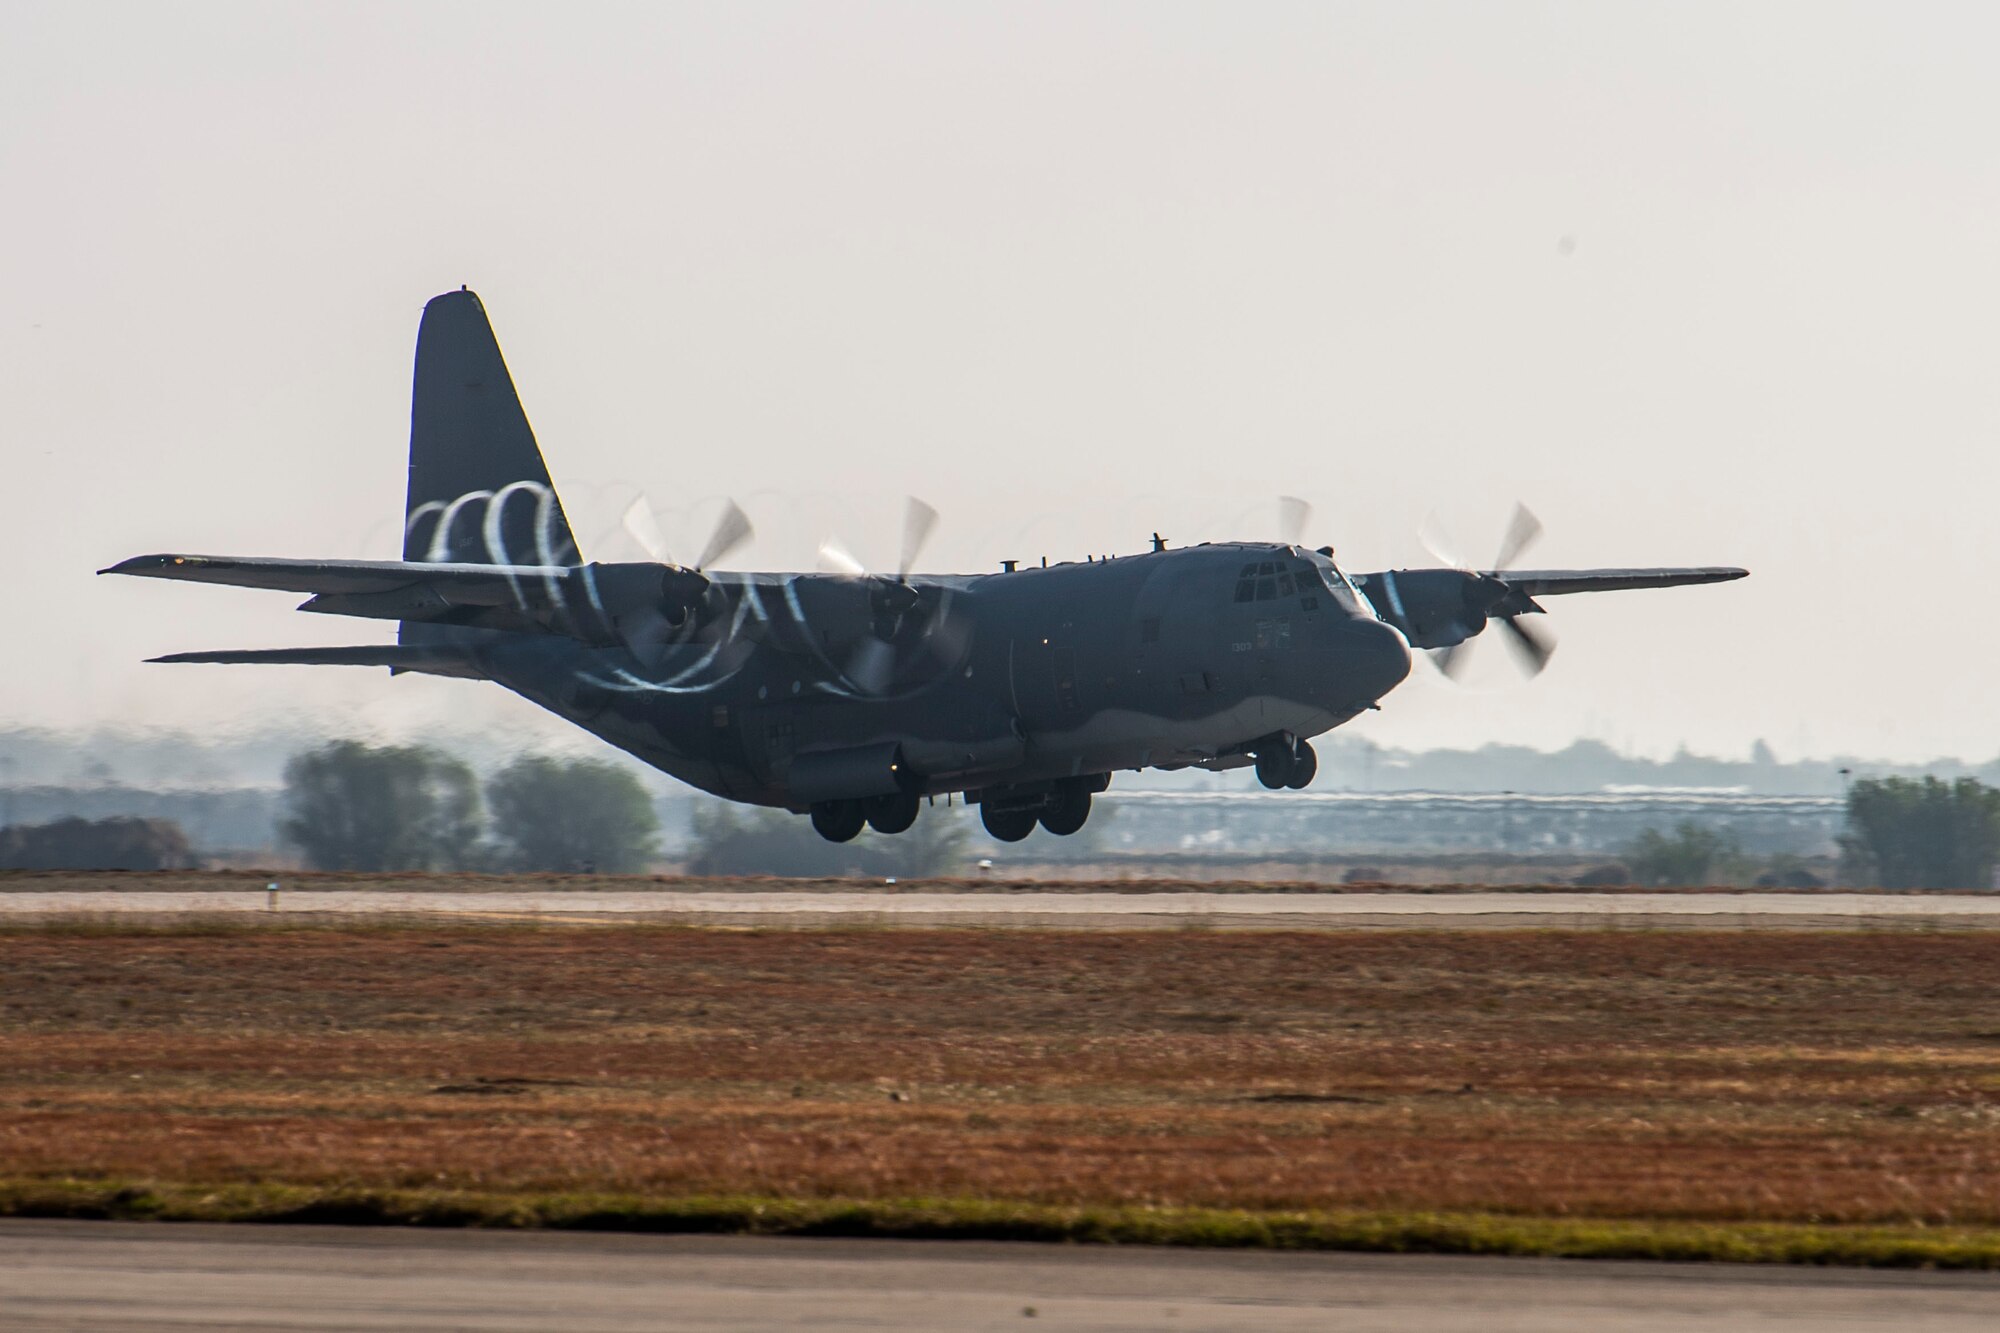 An AC-130W Stinger II gunship, Tail No. 1303, takes off on the runway at Cannon Air Force Base, N.M., for its final flight prior to retirement Oct. 19, 2020. As a gunship, Tail No. 1303 made its claim to fame by being the first gunship to record a combat kill on Feb. 9, 2011. It then went on to achieve another milestone by having the distinction of being the first 105mm cannon-installed whiskey to confirm a 105mm kill in December of 2016. (U.S. Air Force photo by Staff Sgt. Luke Kitterman)